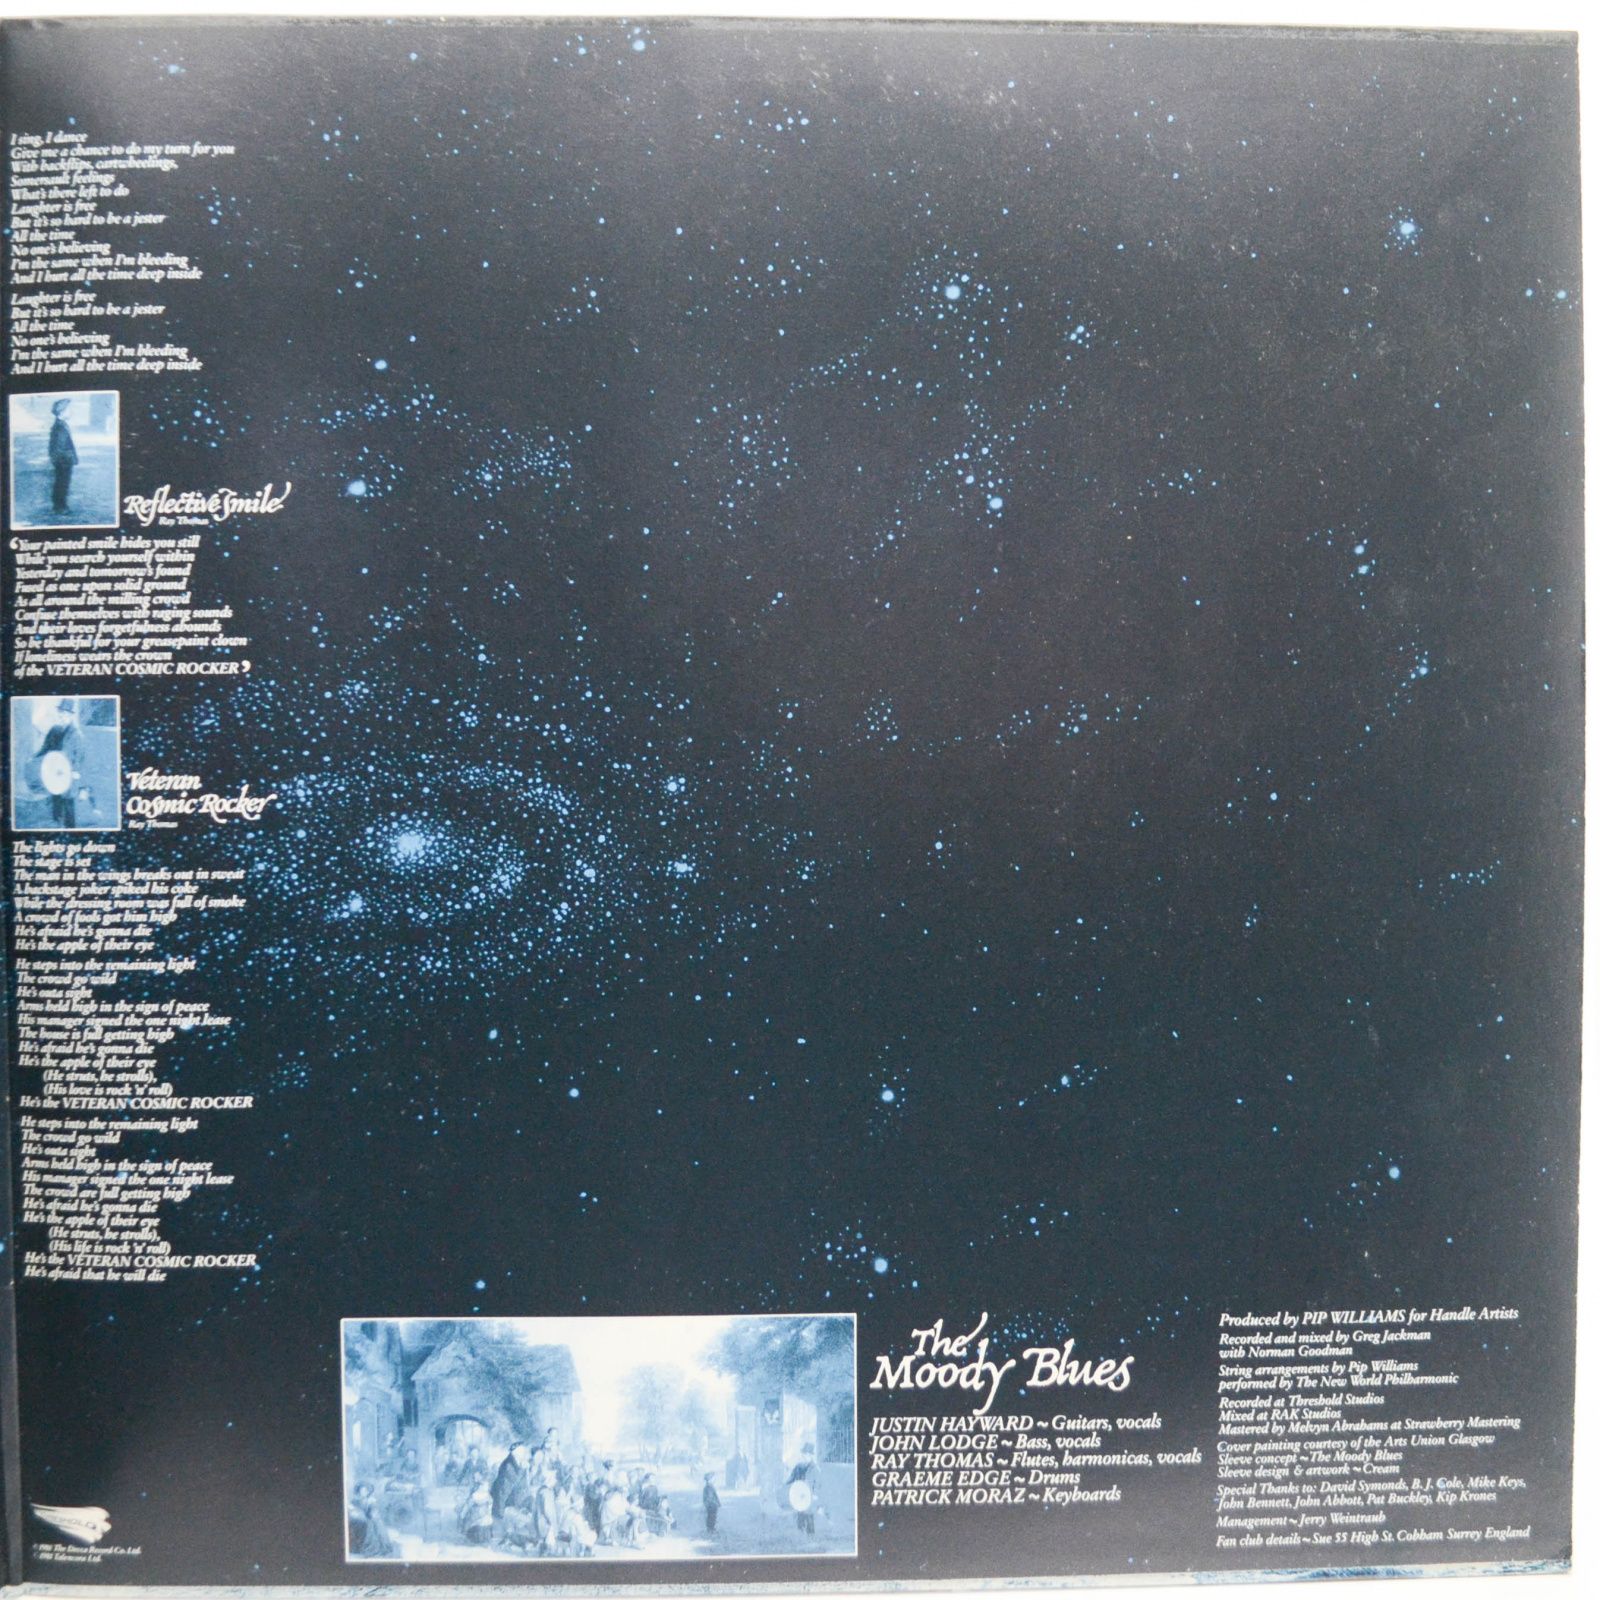 Moody Blues — Long Distance Voyager, 1981